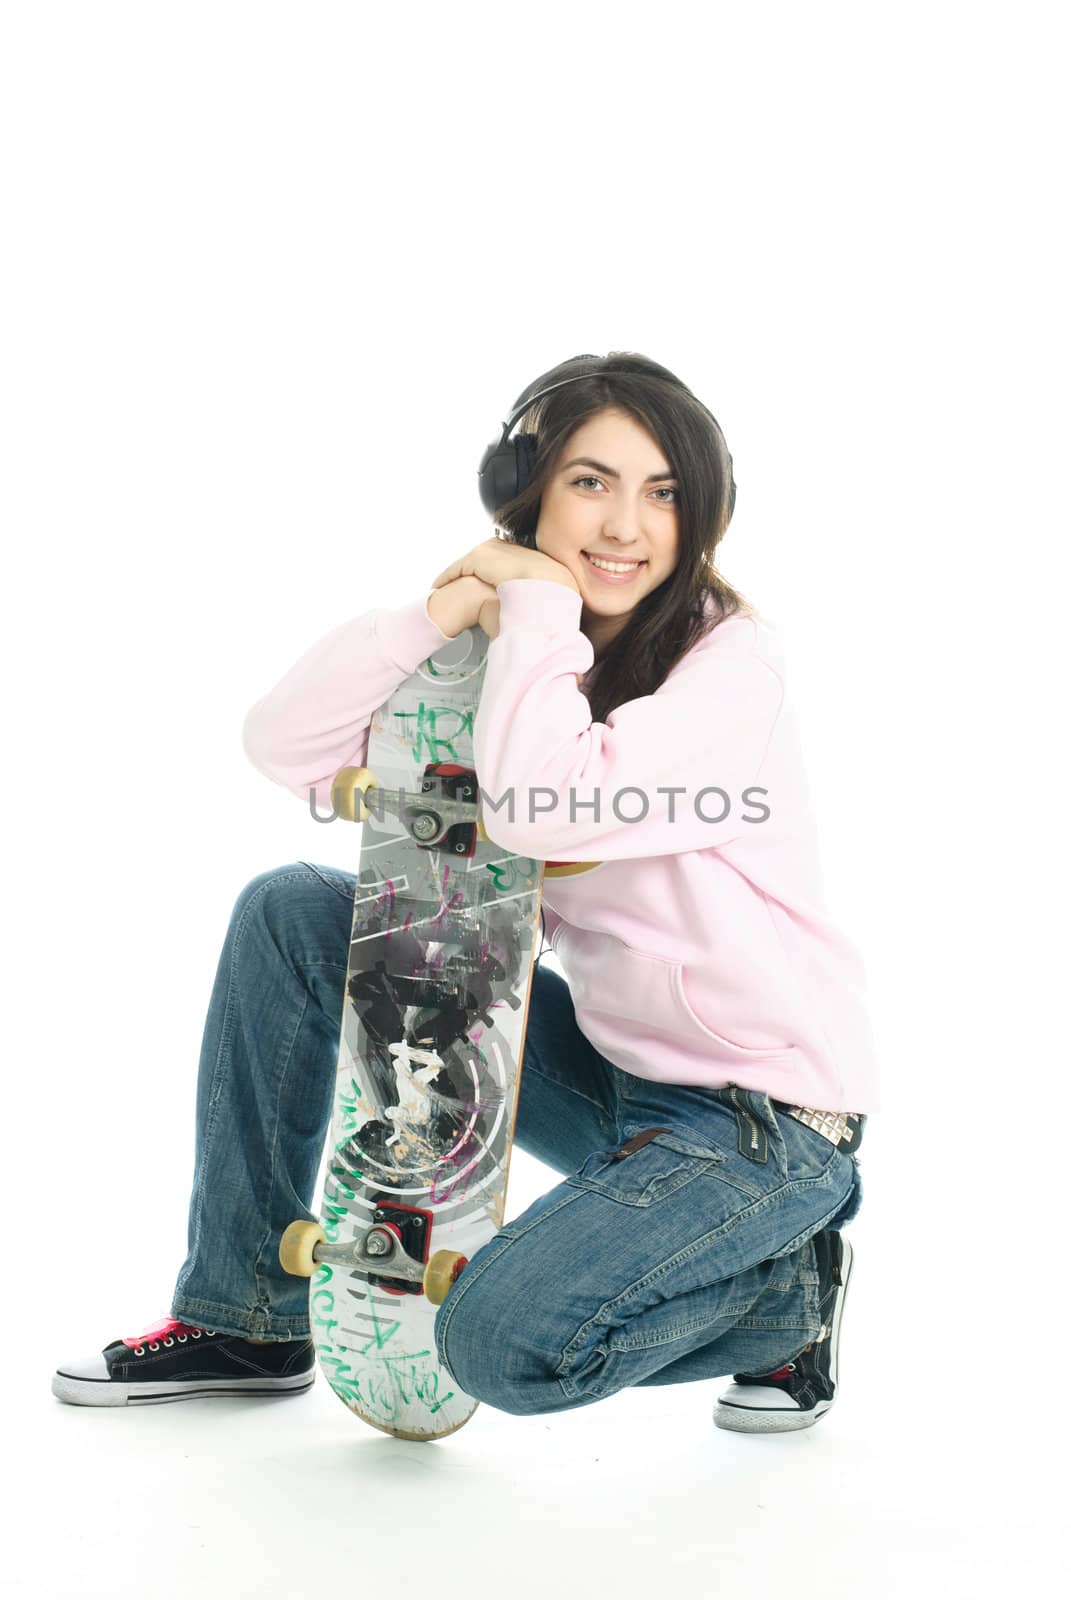 girl with earphones and a skate boeard by lanak